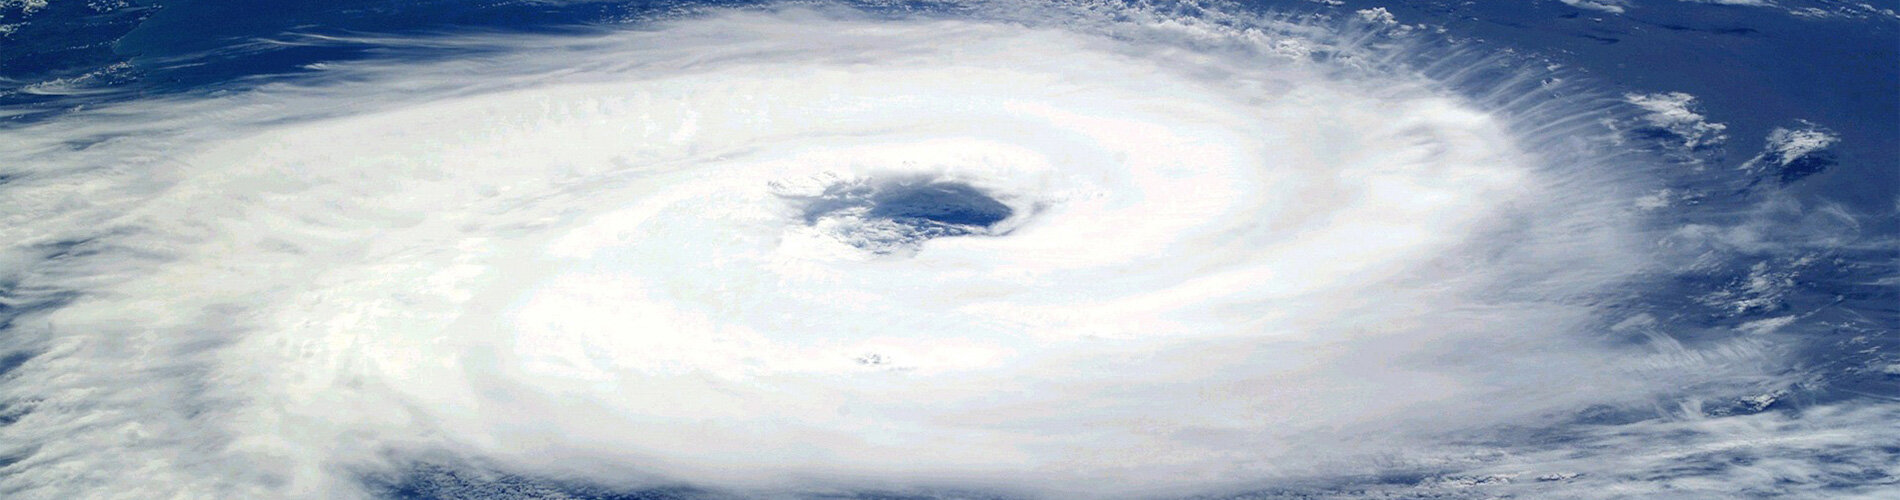 The eye of a hurricane from space.